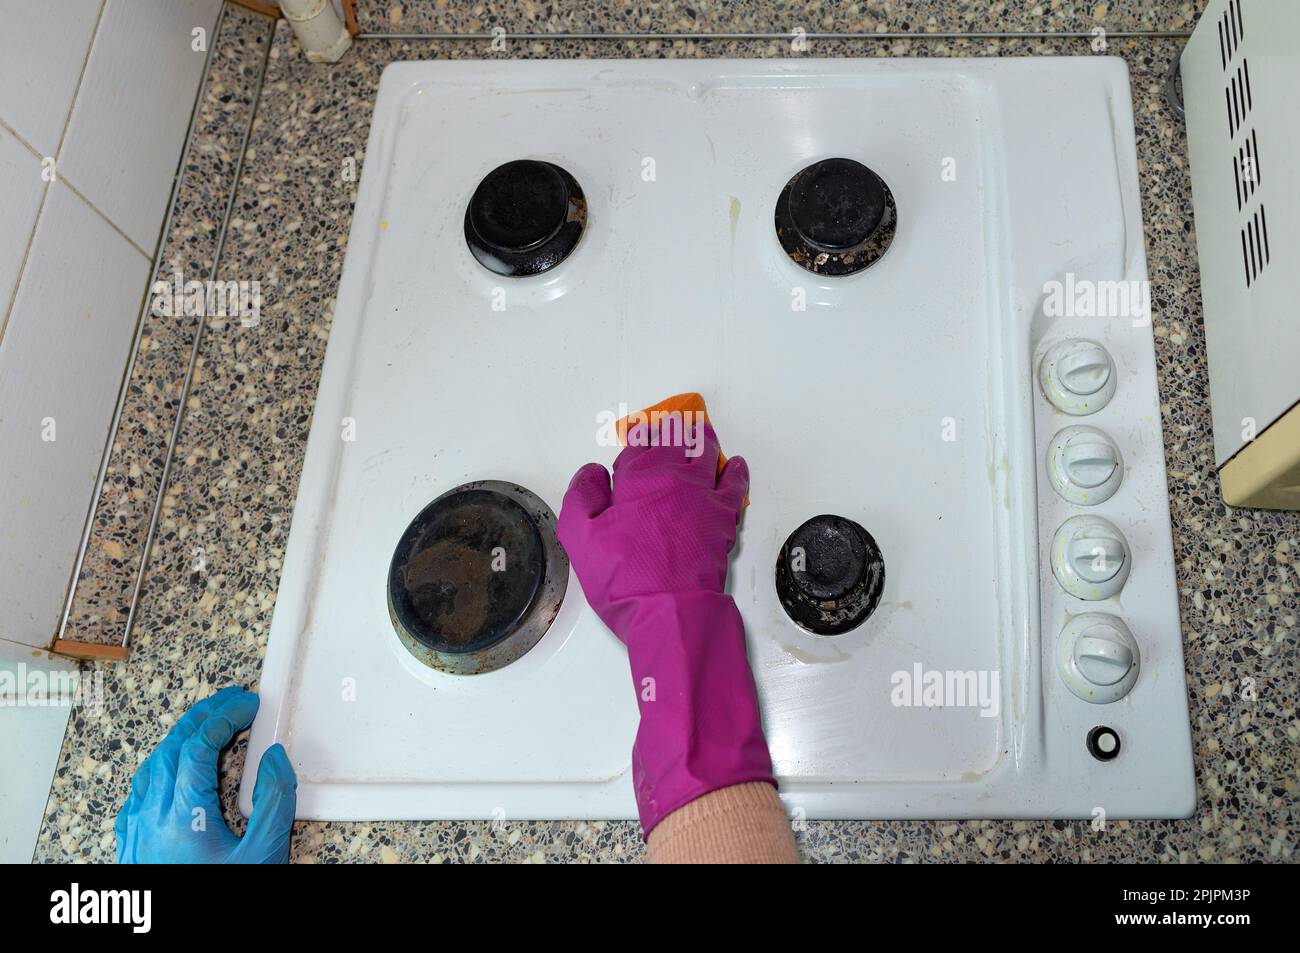 Women's hands in latex gloves wash the gas stove in the kitchen. Stock Photo